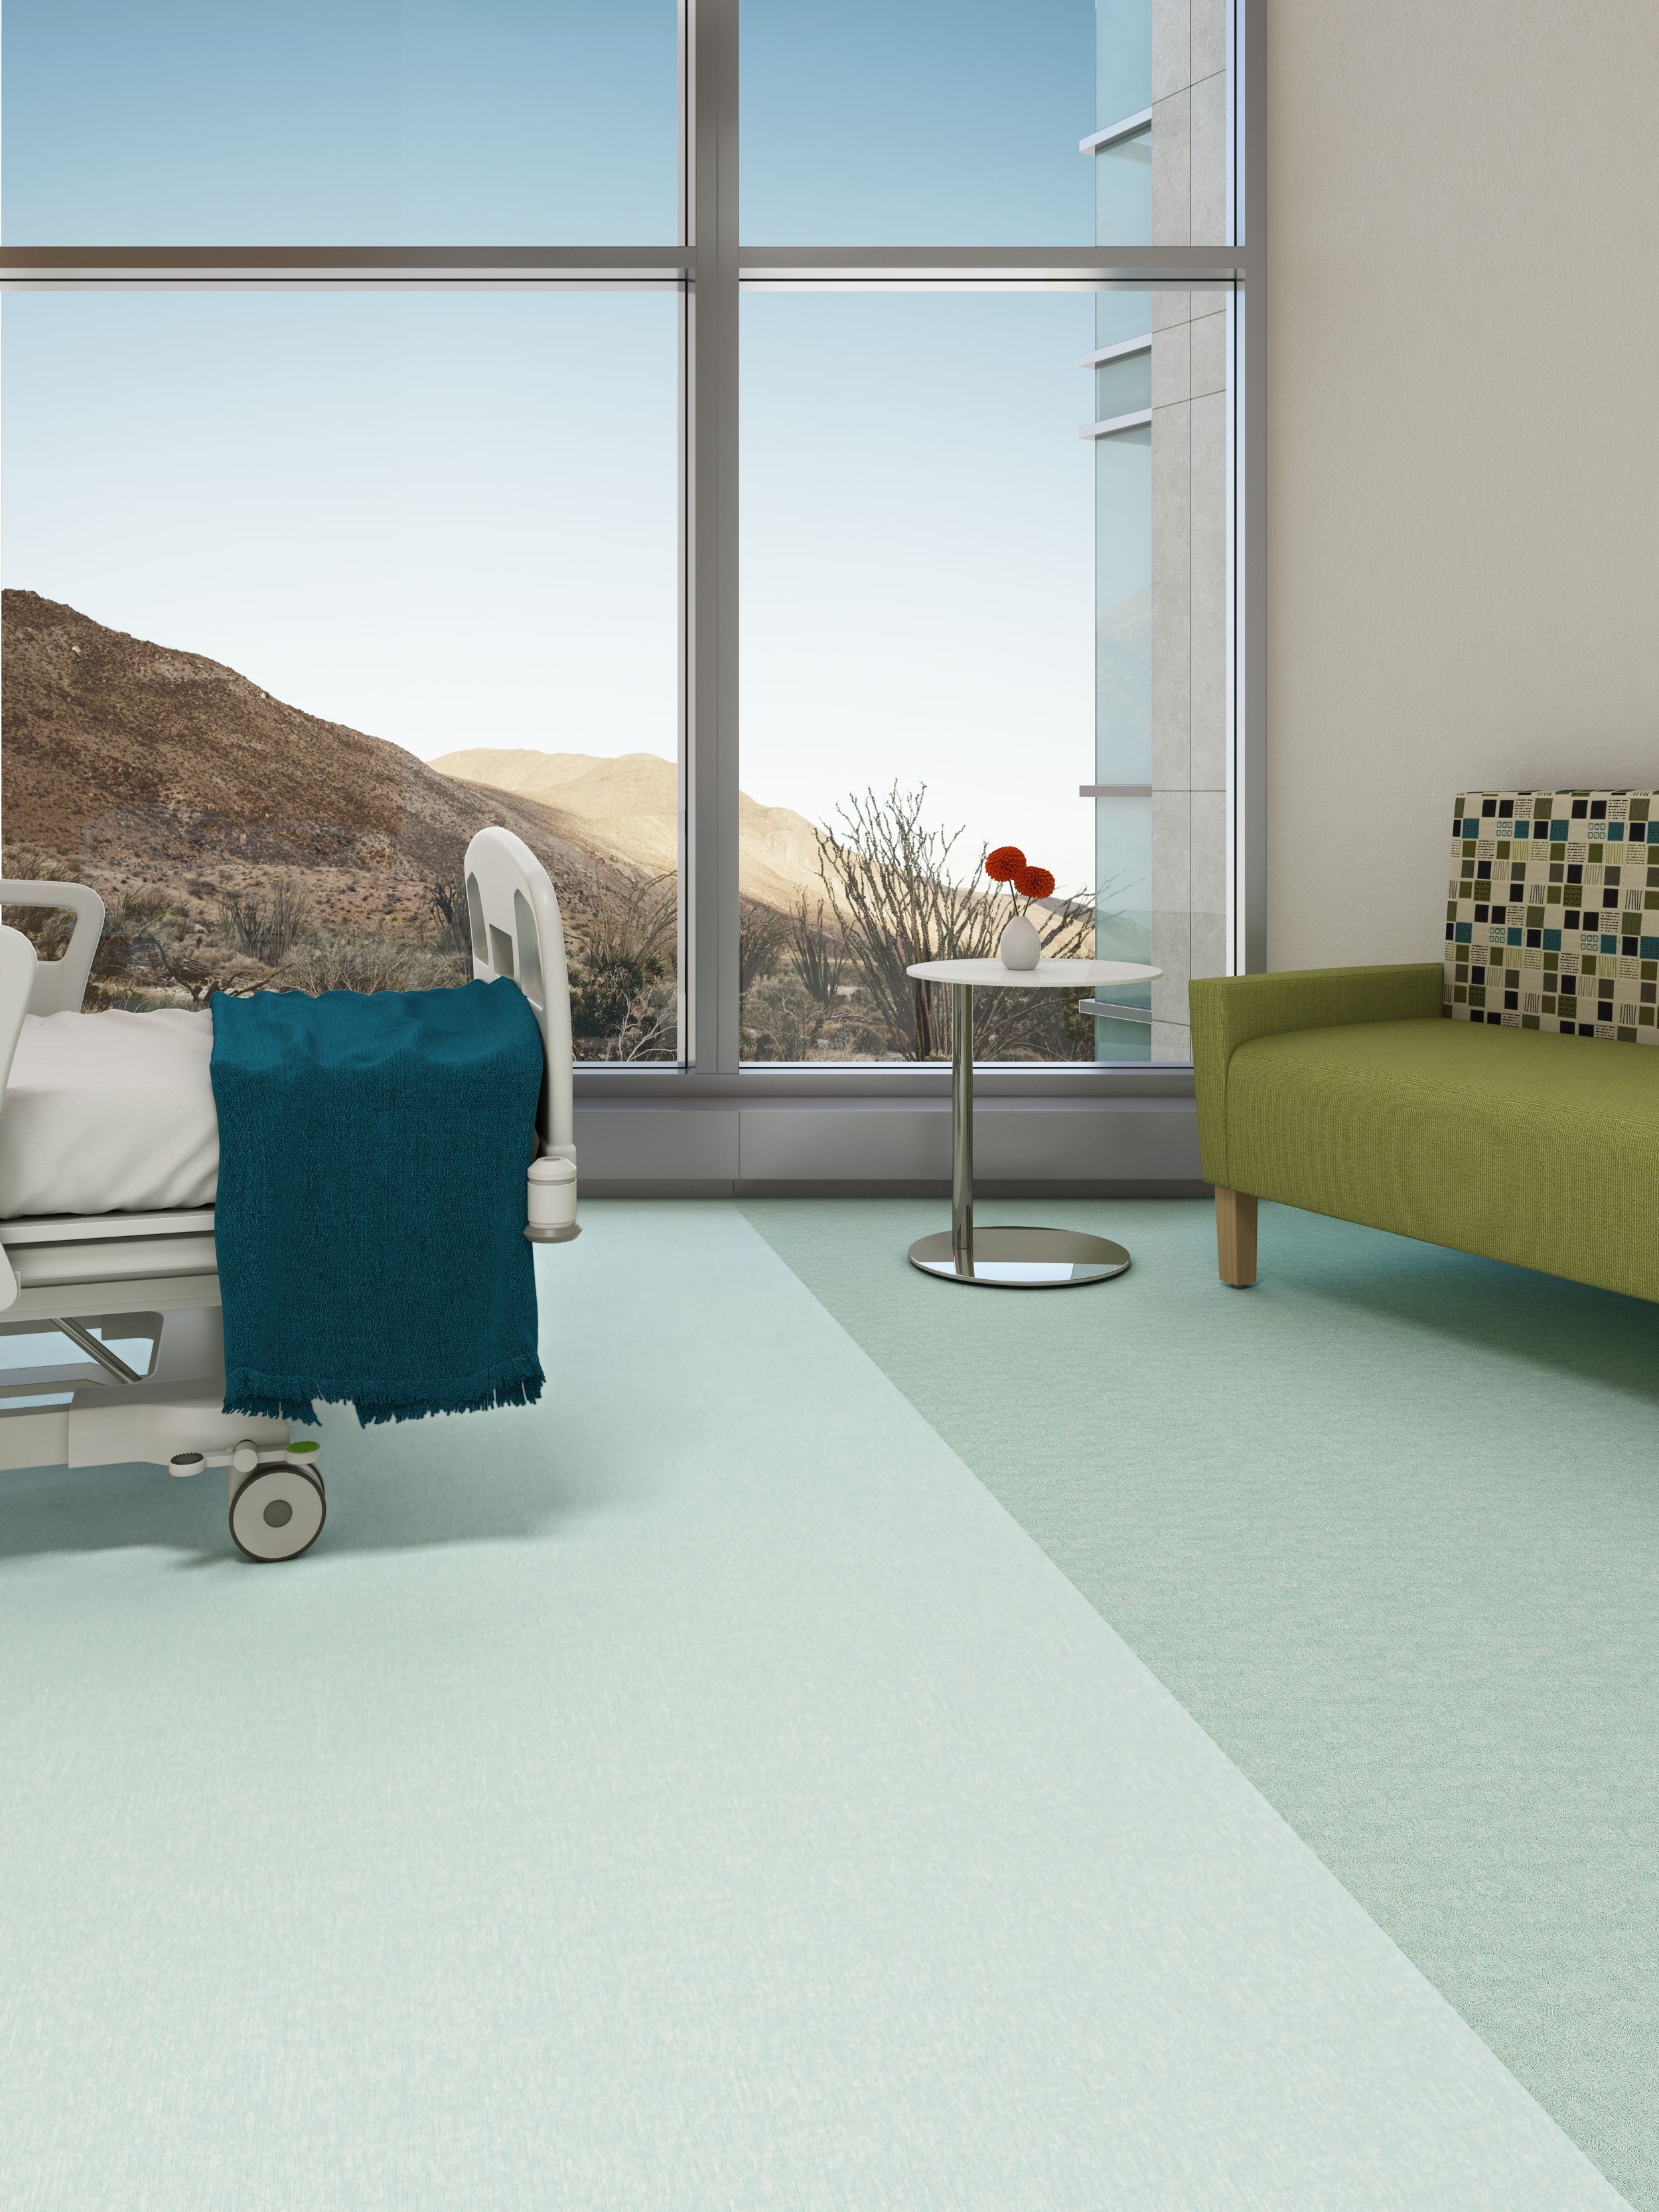 Interface Spike-tacular and Bloom With a View vinyl sheet in hospital patient room imagen número 5